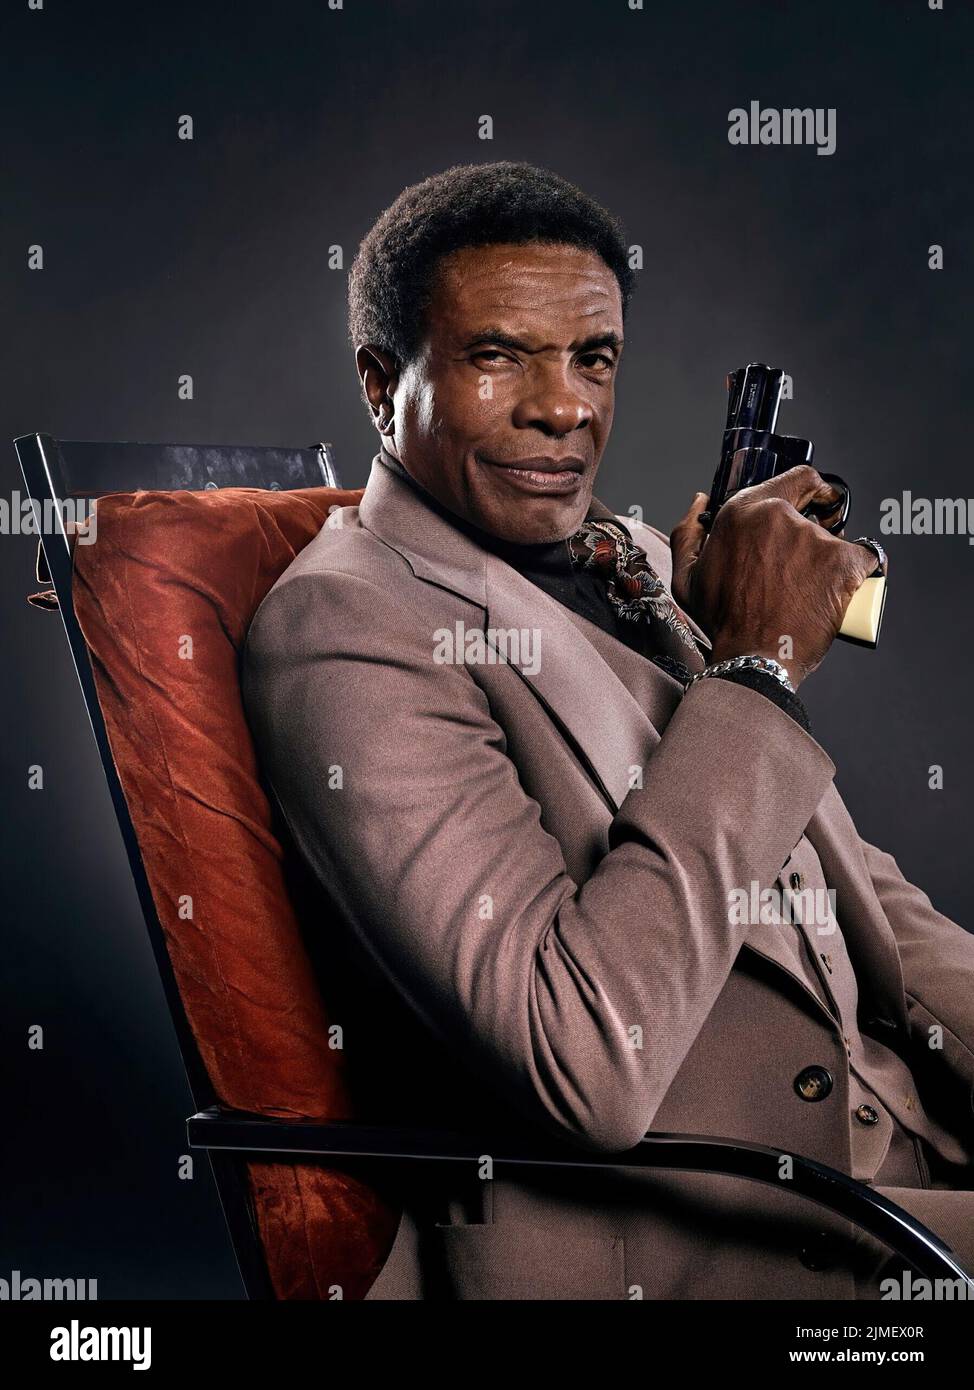 KEITH DAVID in THE NICE GUYS (2016), directed by SHANE BLACK. Credit: MISTY MOUNTAINS/SILVER PICTURES/WAYPOINT ENTERTAINMENT / Album Stock Photo